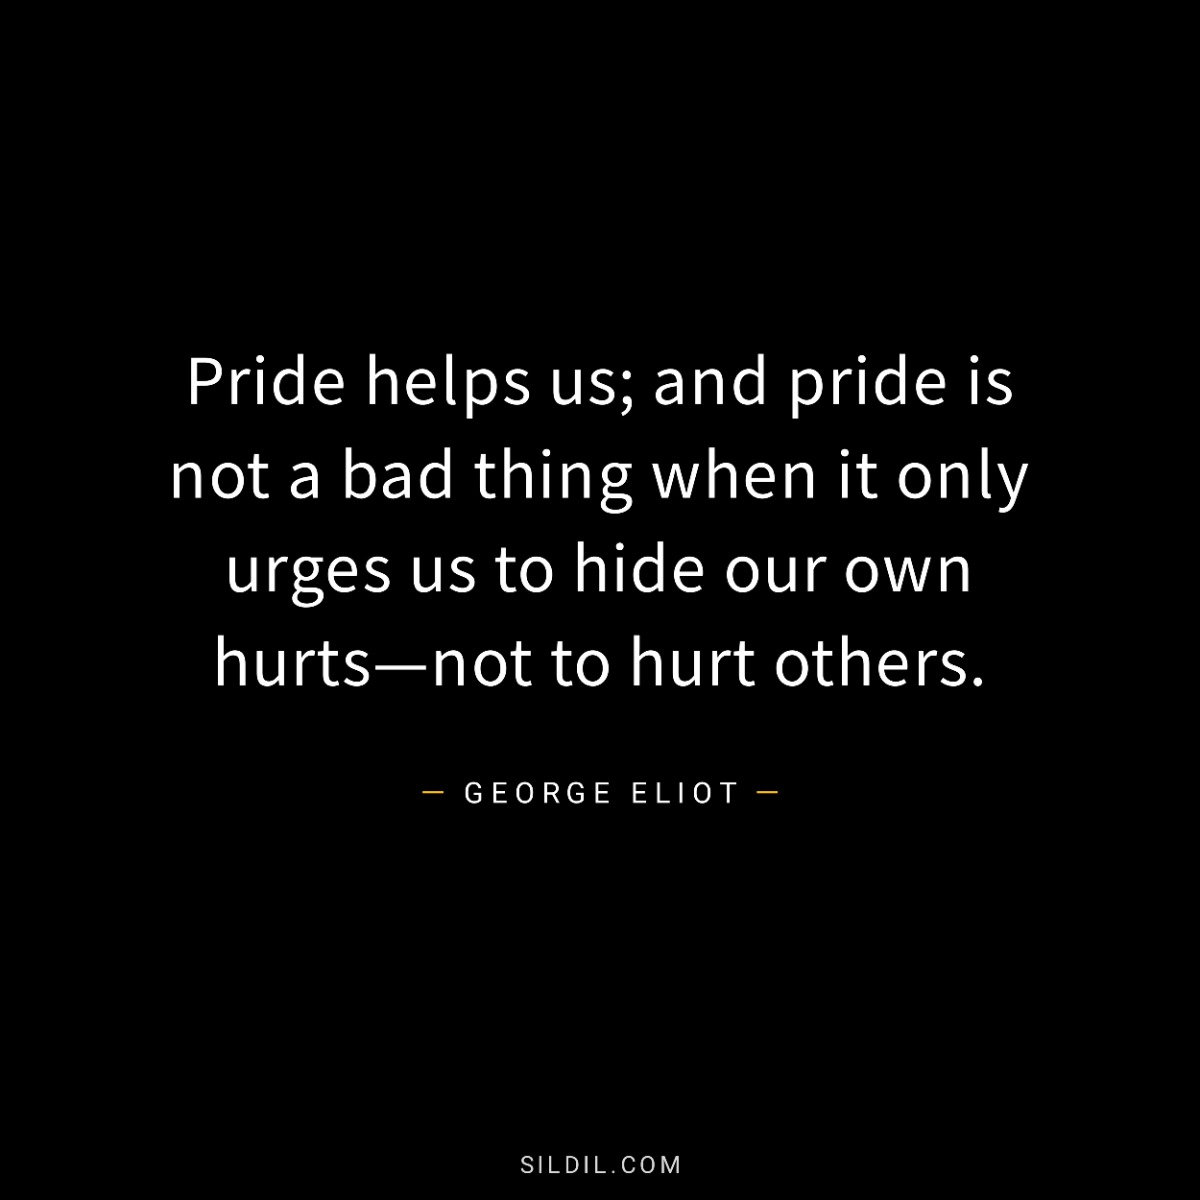 Pride helps us; and pride is not a bad thing when it only urges us to hide our own hurts—not to hurt others.